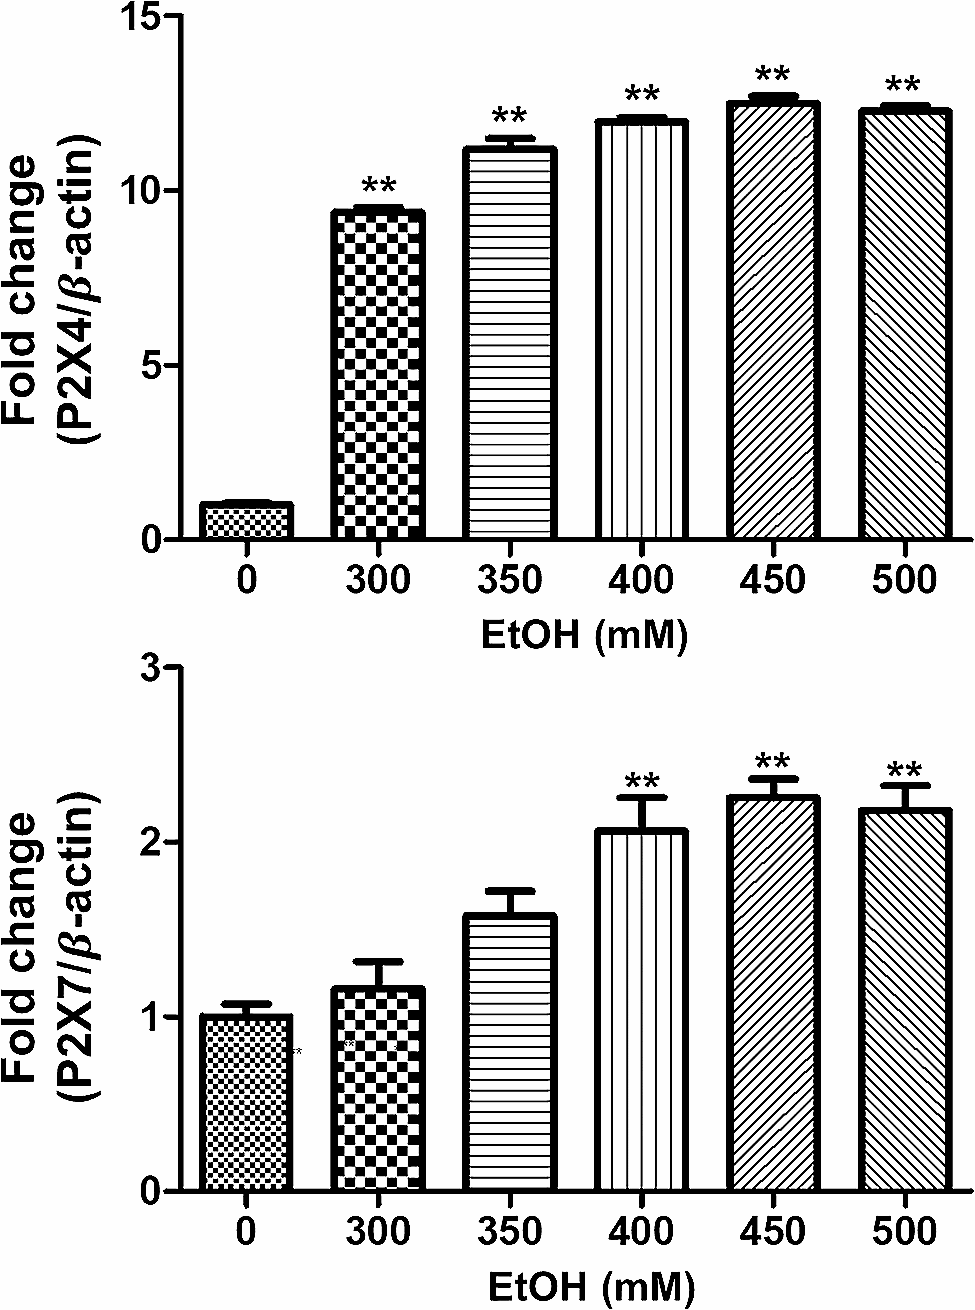 Suppression of P2X4 and P2X7 by Lactobacillus rhamnosus vitaP1: effects on hangover symptoms